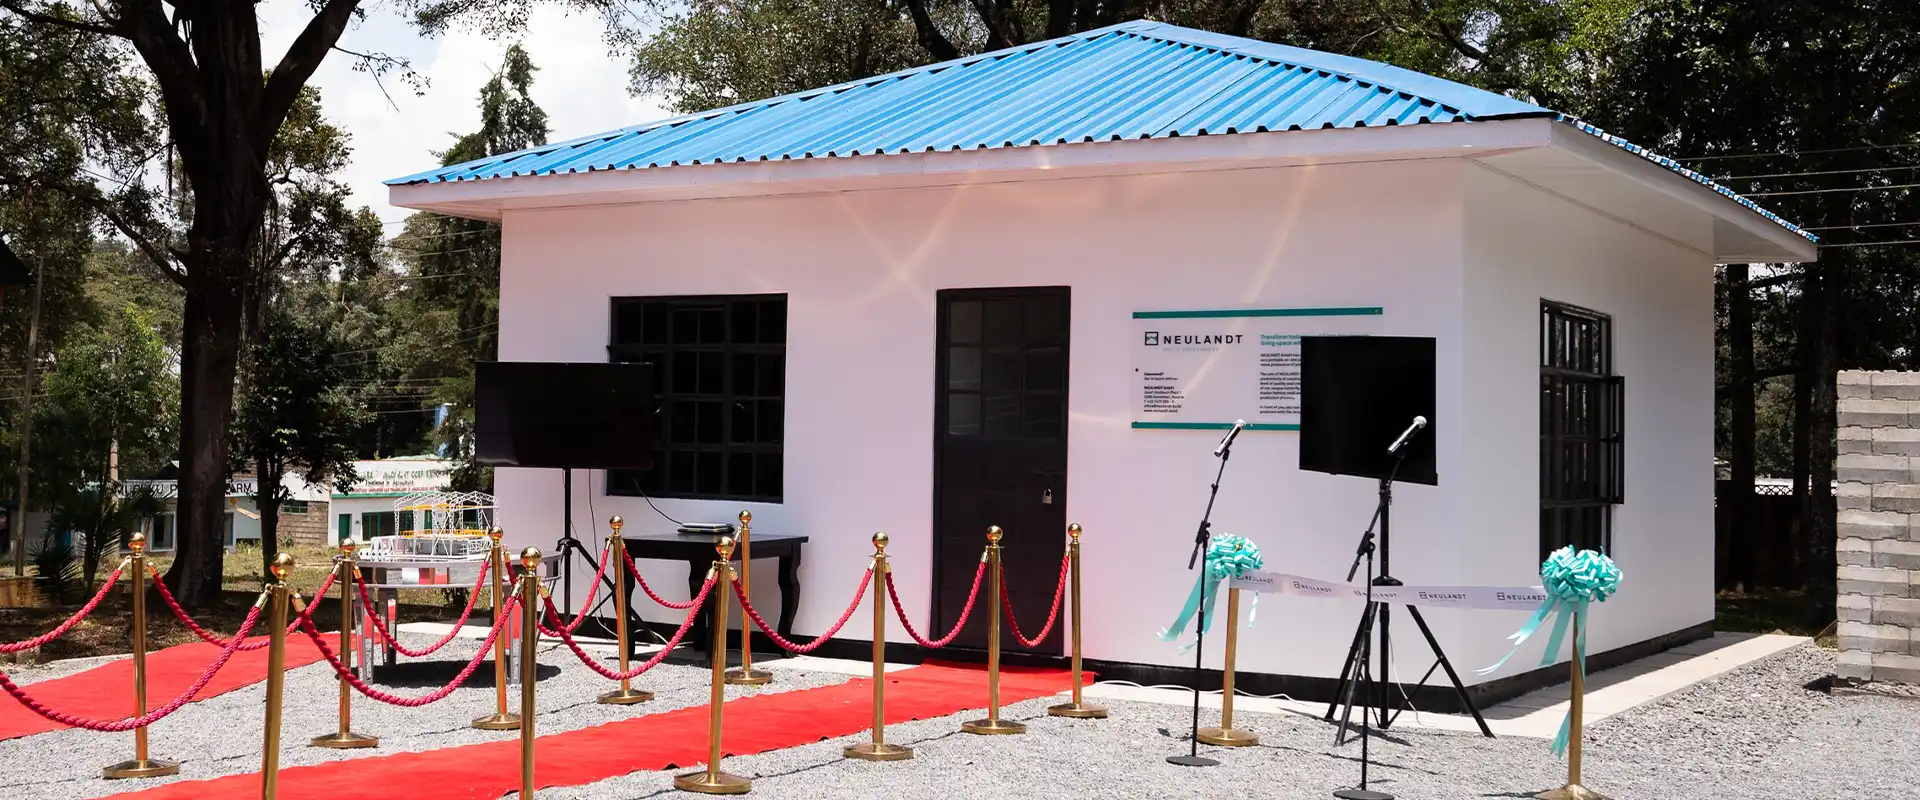 Show house at the NCA show ground in Kenia with a red carpet for the opening ceremony which was built with concrete precast elements